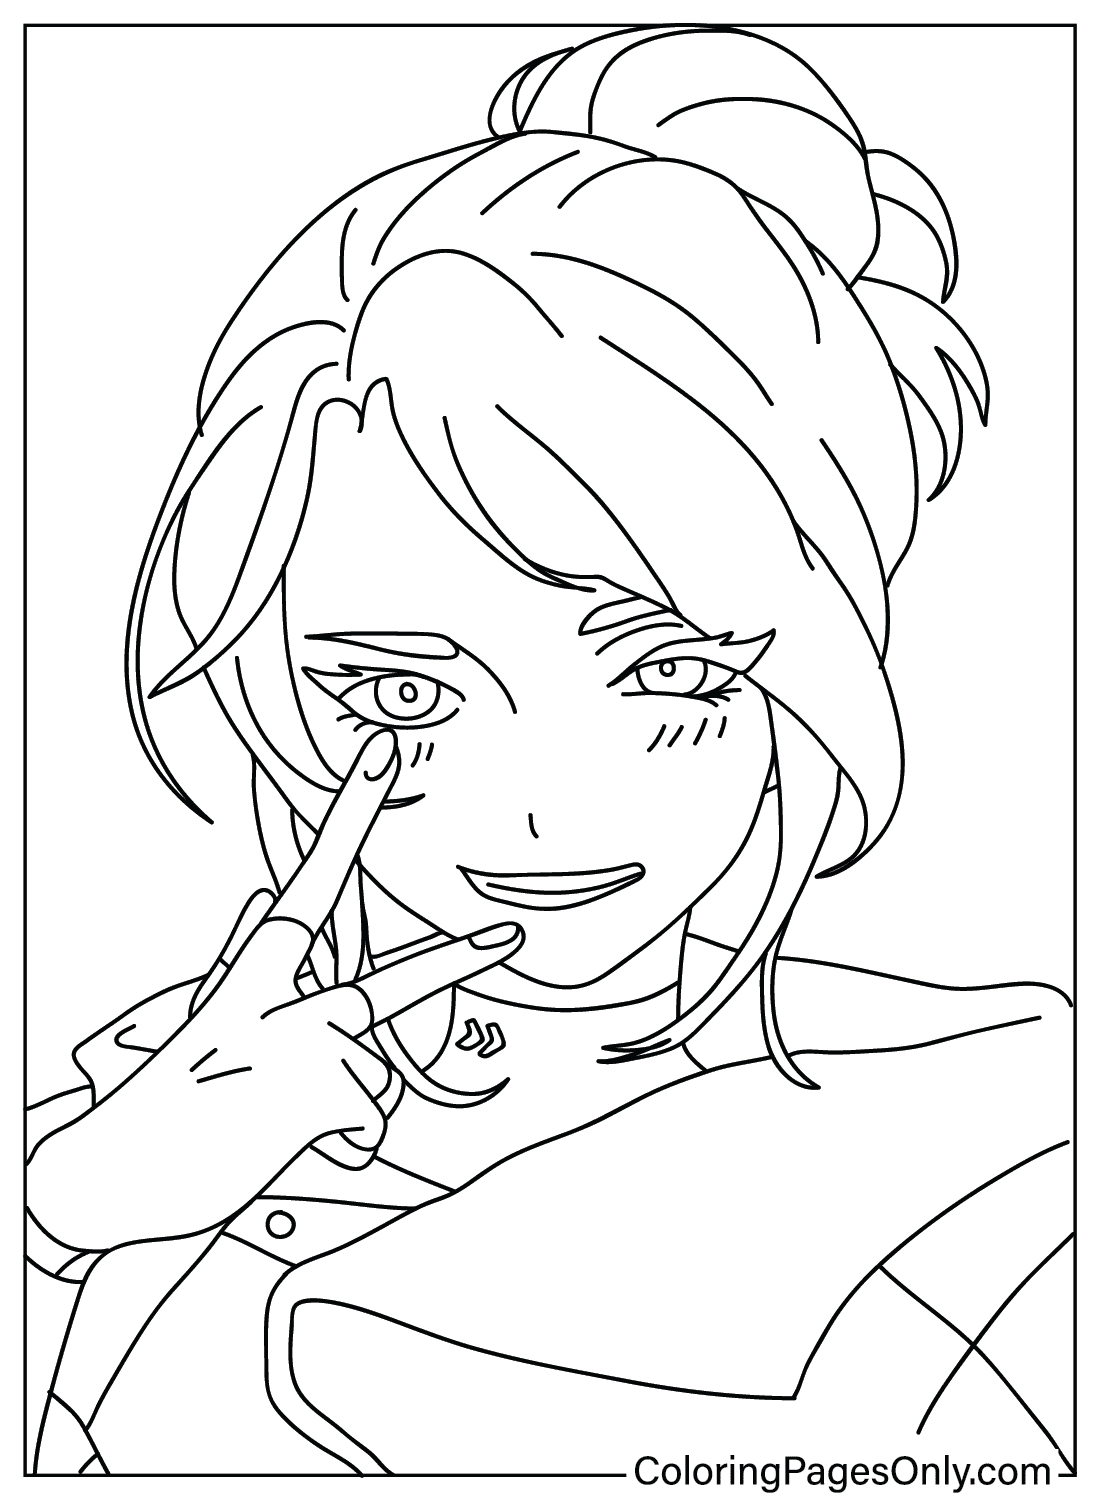 Jett Valorant Coloring Page - Free Printable Coloring Pages